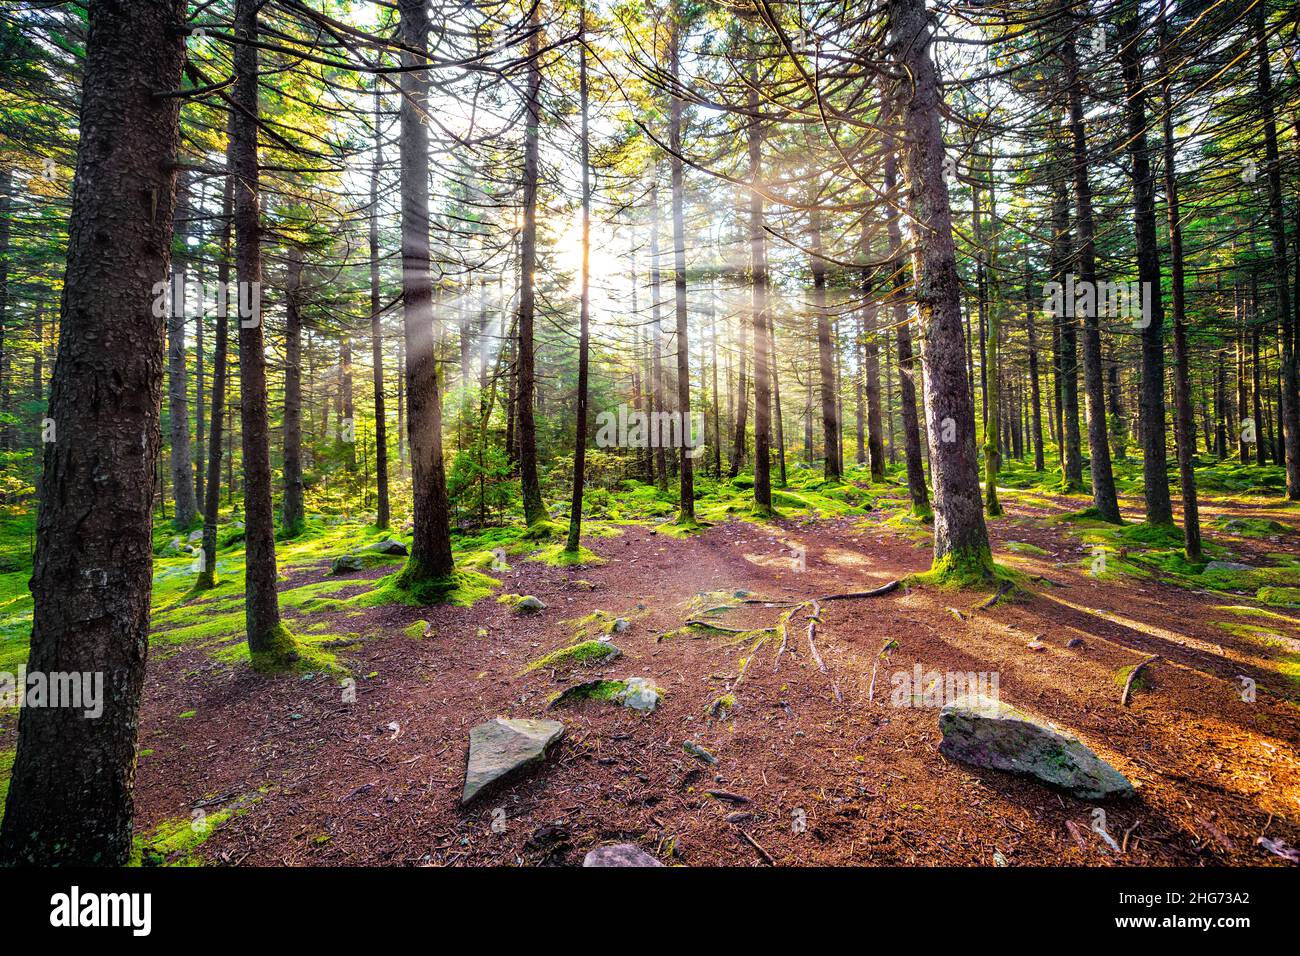 Enchanted dreamy fairy tale moss forest with sun rays behind tree conifer trunks in Huckleberry hiking trail in West Virginia Spruce Knob mountains Stock Photo